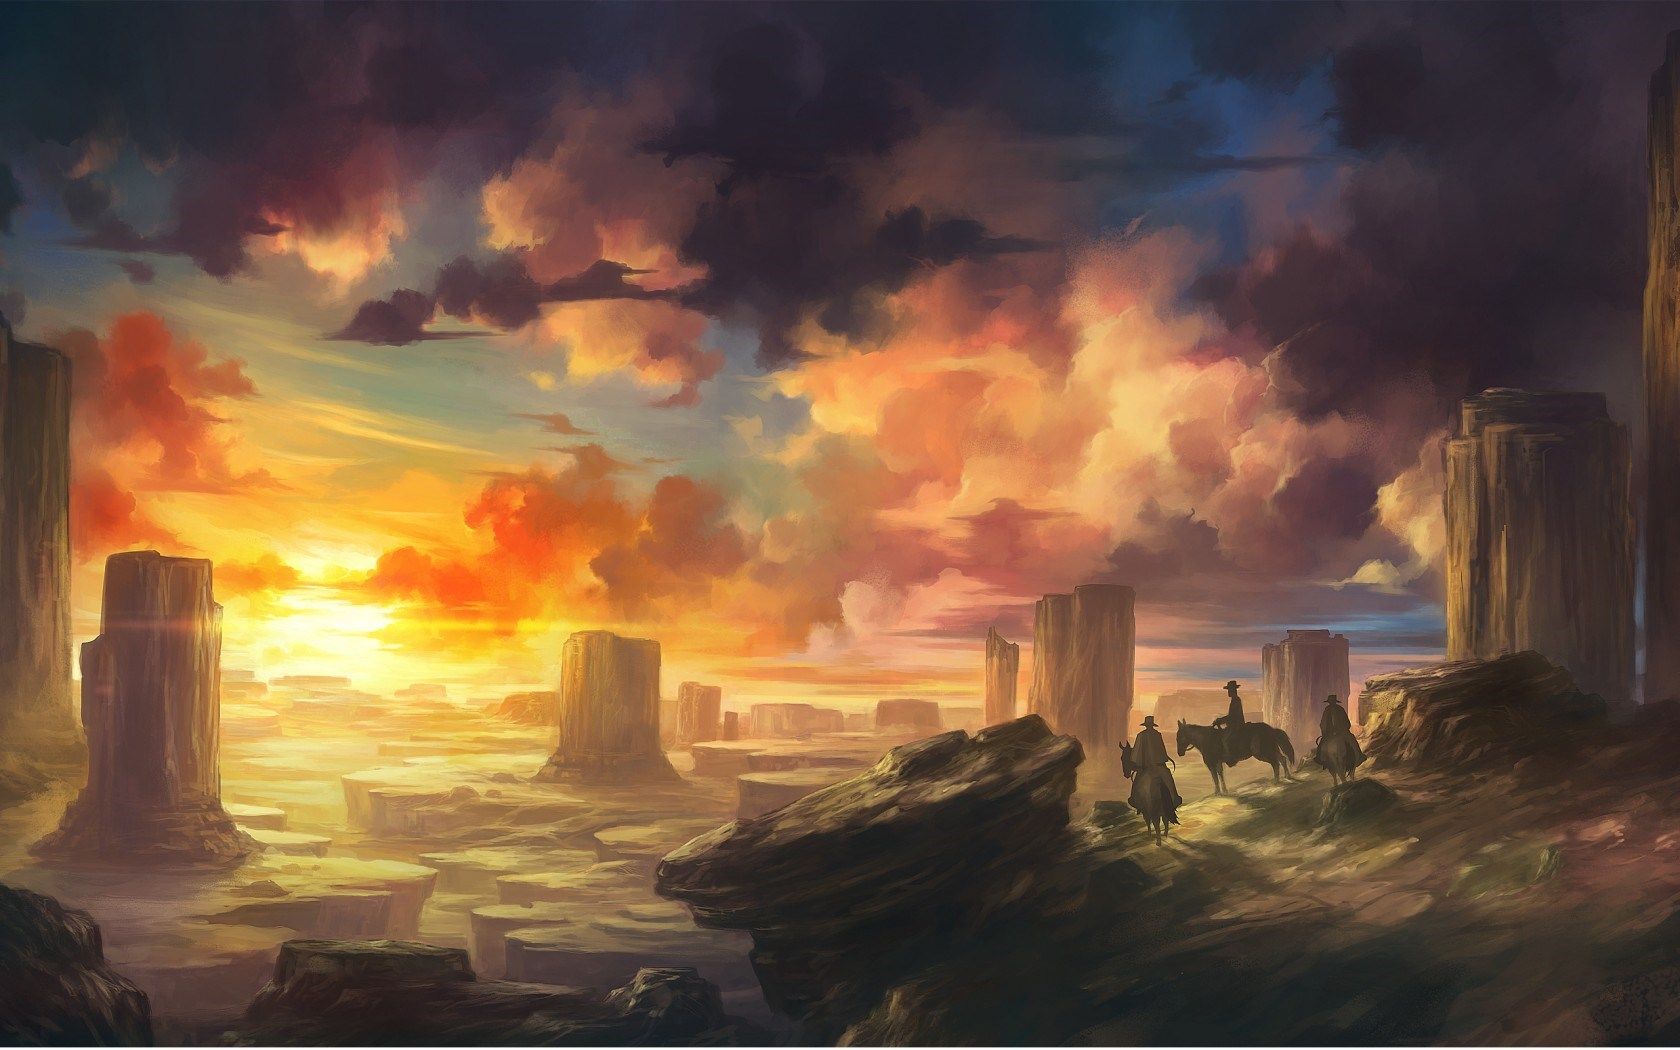 Landscape, rocks, horses, riders, wild, west, sunset, anime wallpapers